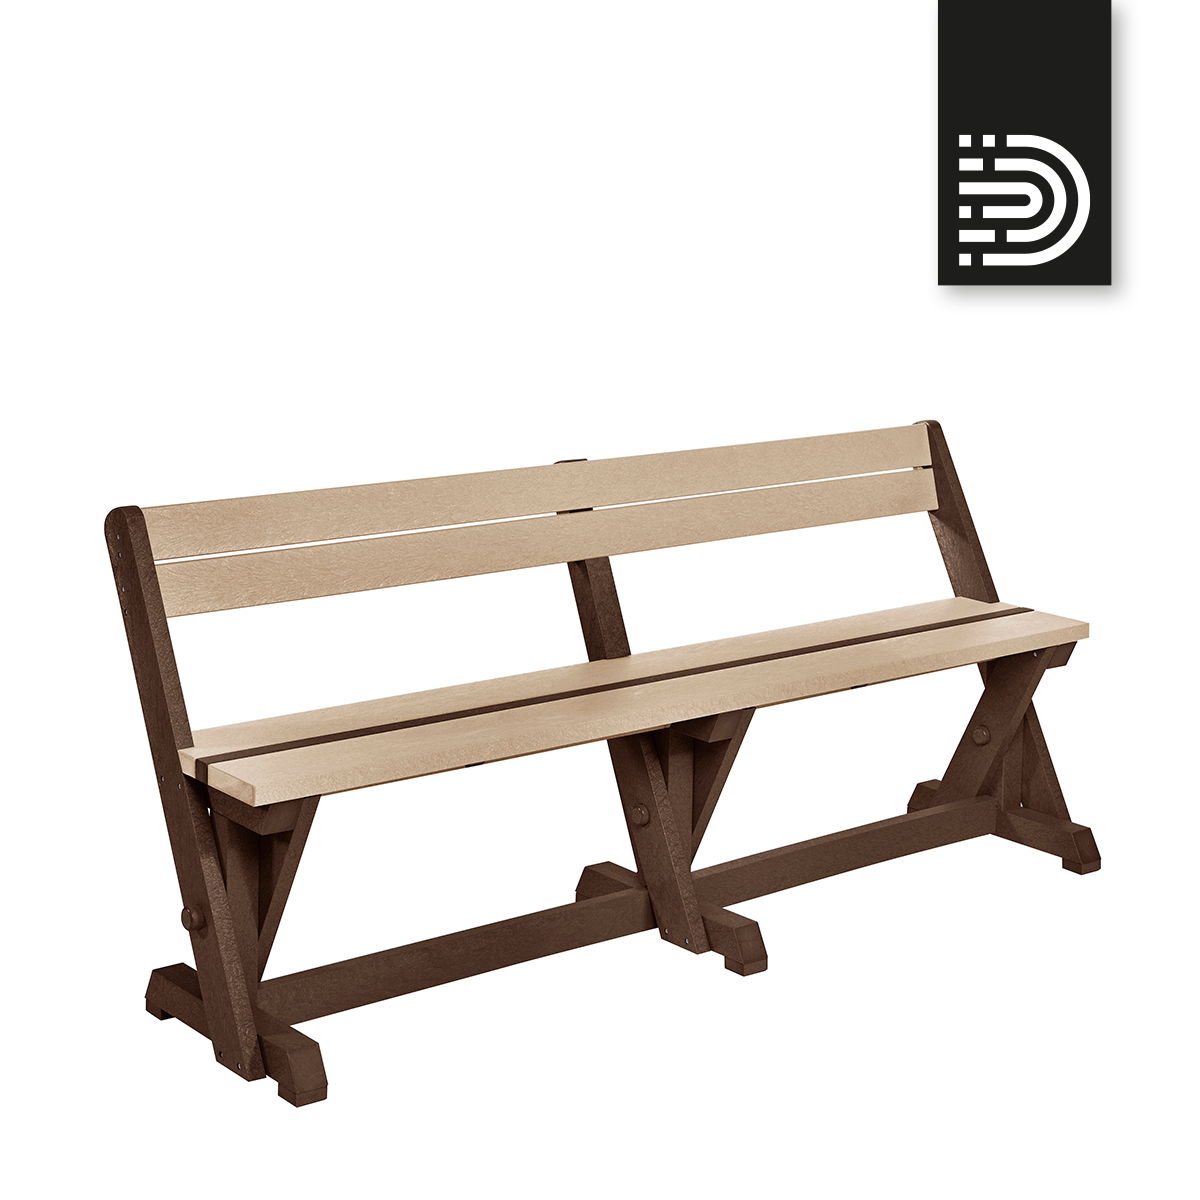 B202 Dining Tabel Bench with back - black 14 / beige  07